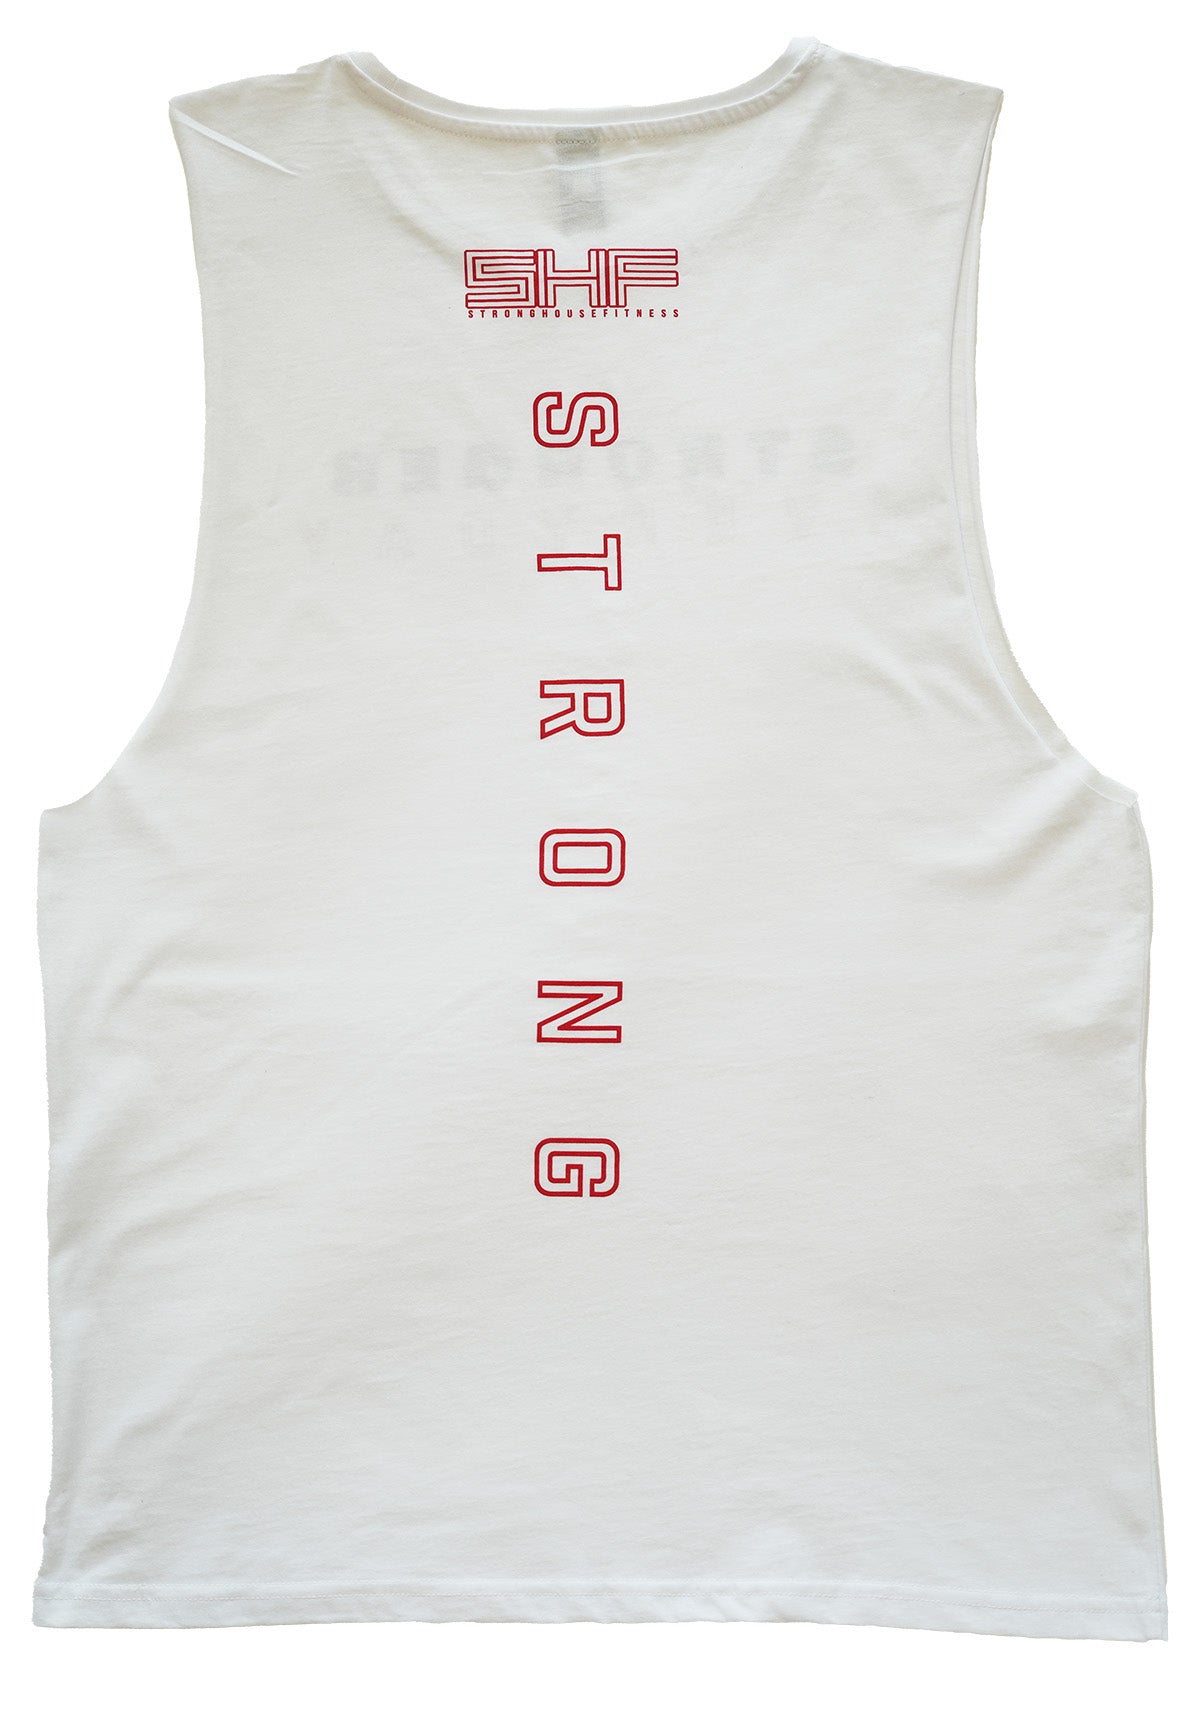 STRONGER EVERYDAY MENS MUSCLE TANK